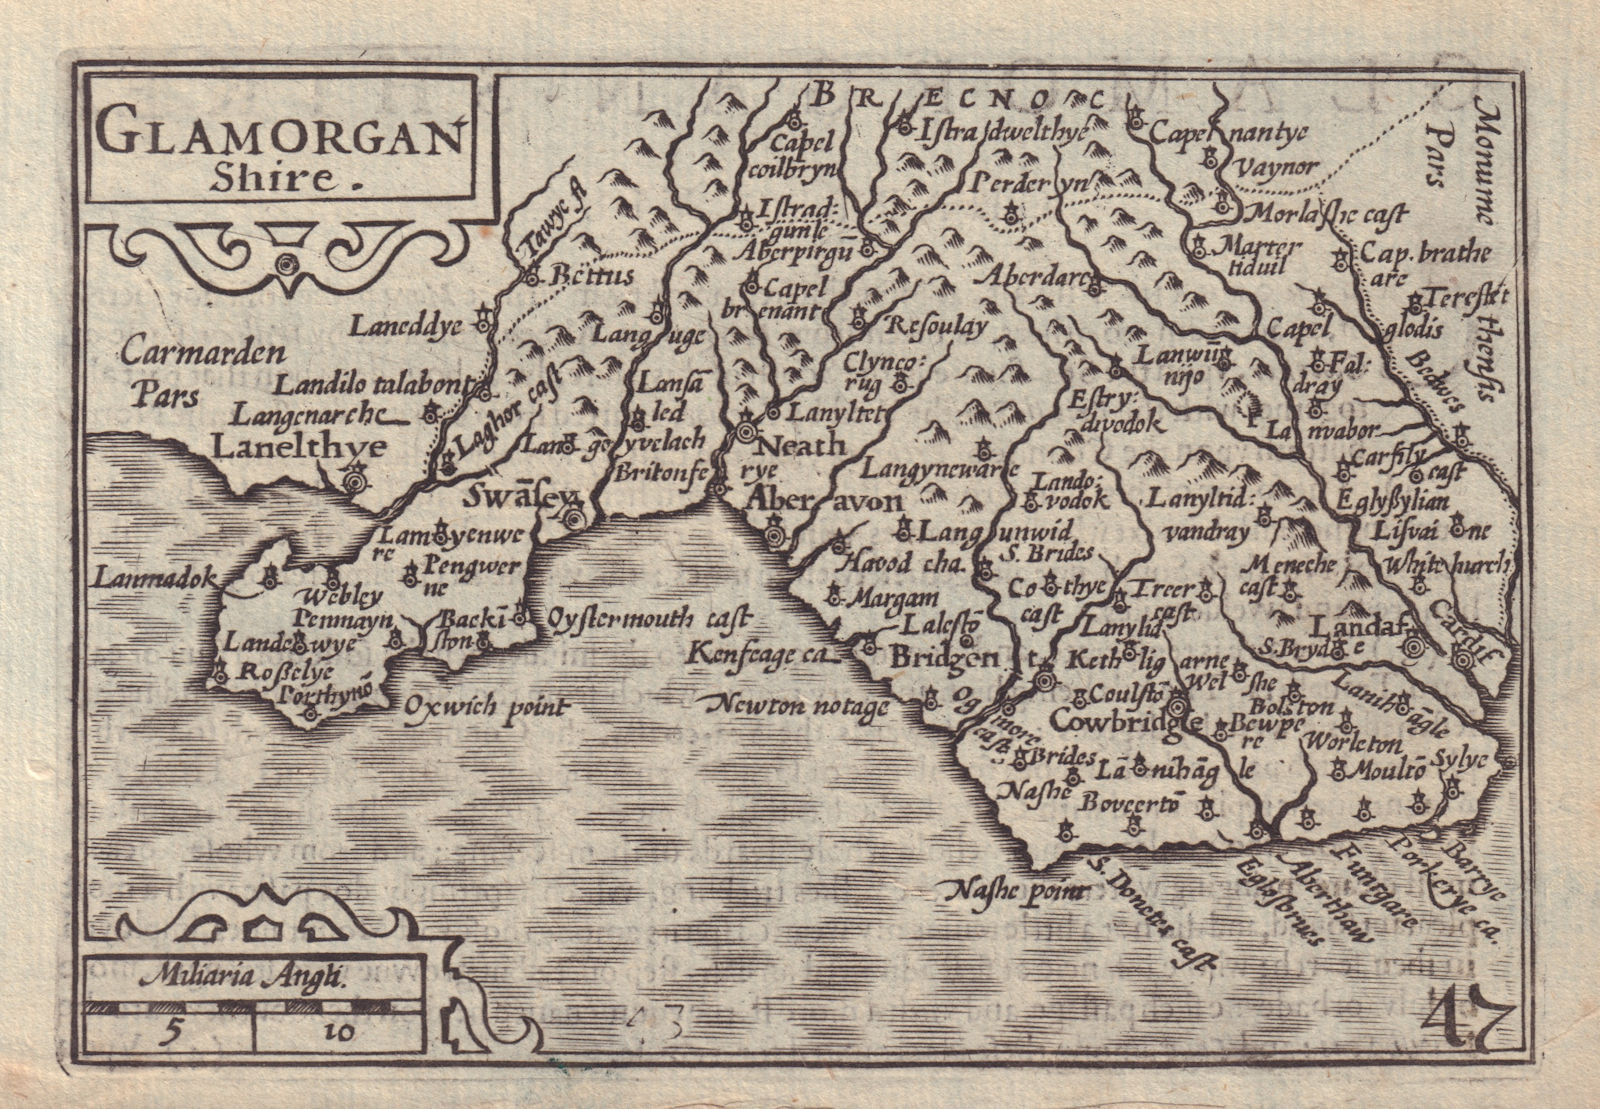 Associate Product Glamorgan Shire by Keere. "Speed miniature" Glamorganshire county map 1632